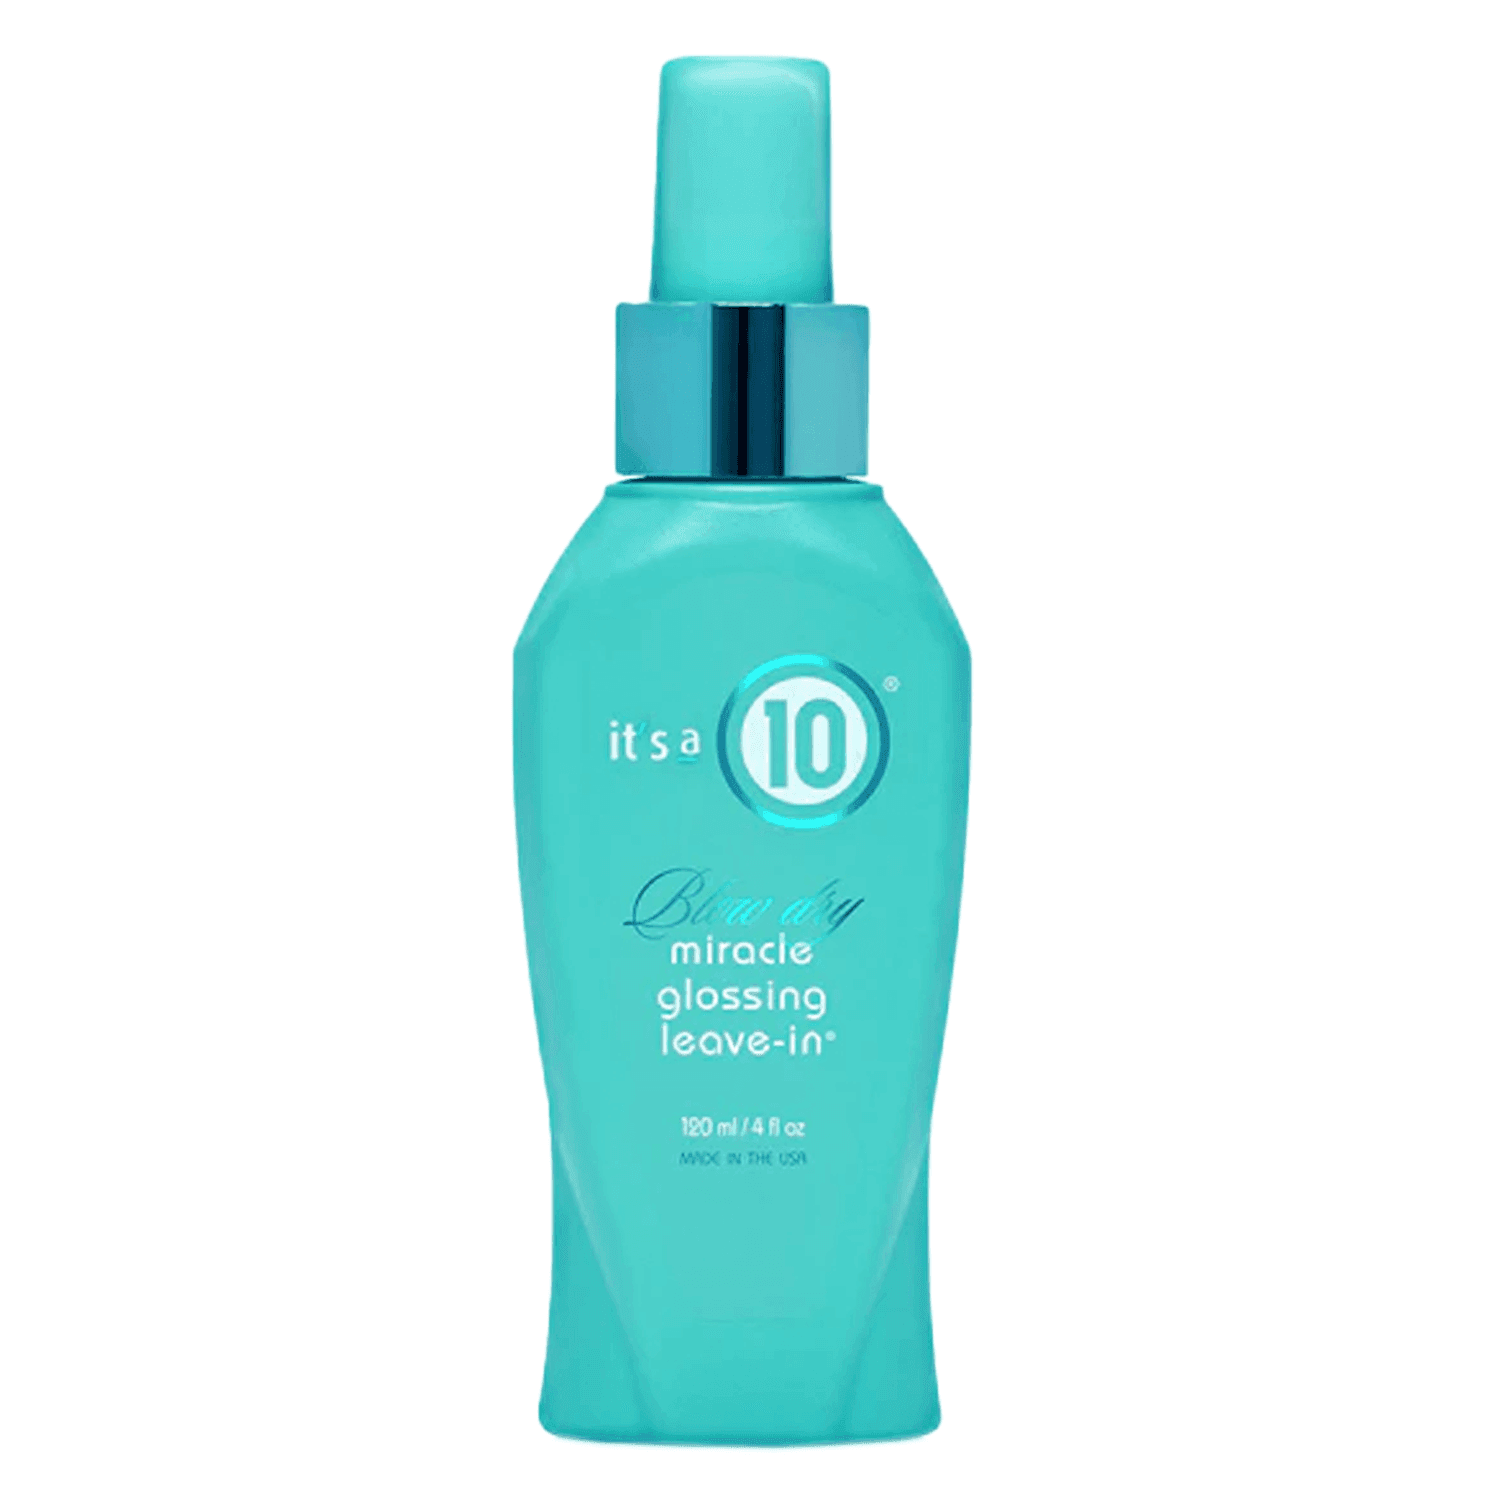 it's a 10 haircare - Blow Dry Miracle Glossing Leave-In